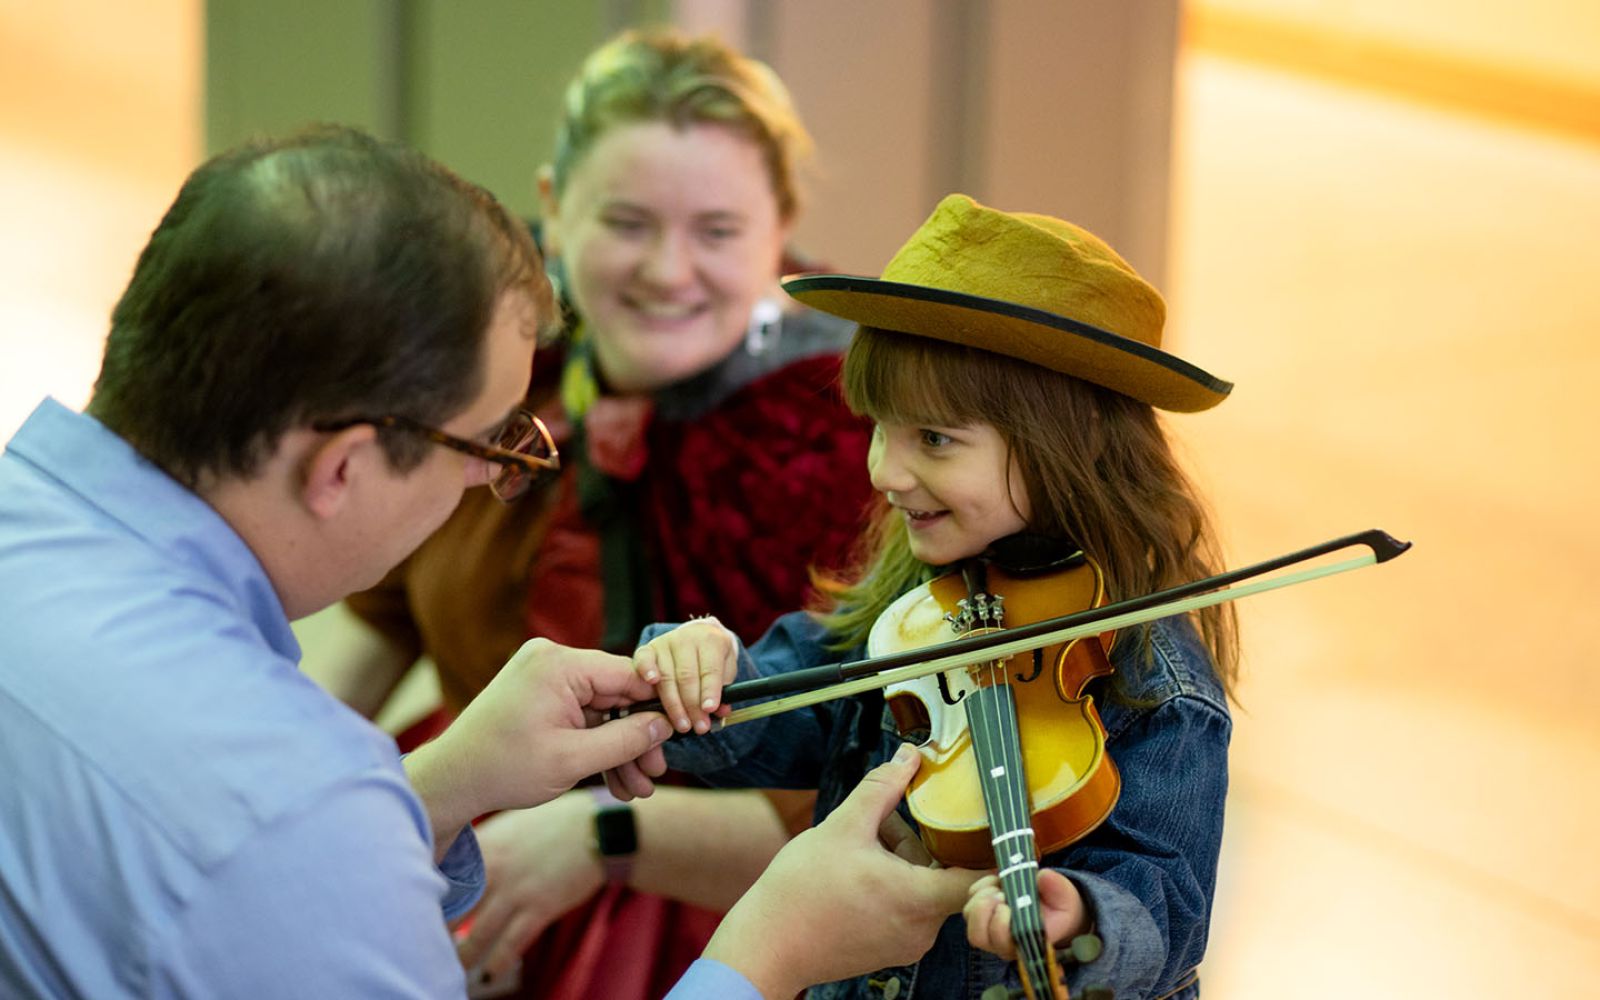 Johnny Appleseed Goes to the Symphony on April 6 is part of Fort Wayne Philharmonic's Family Series.